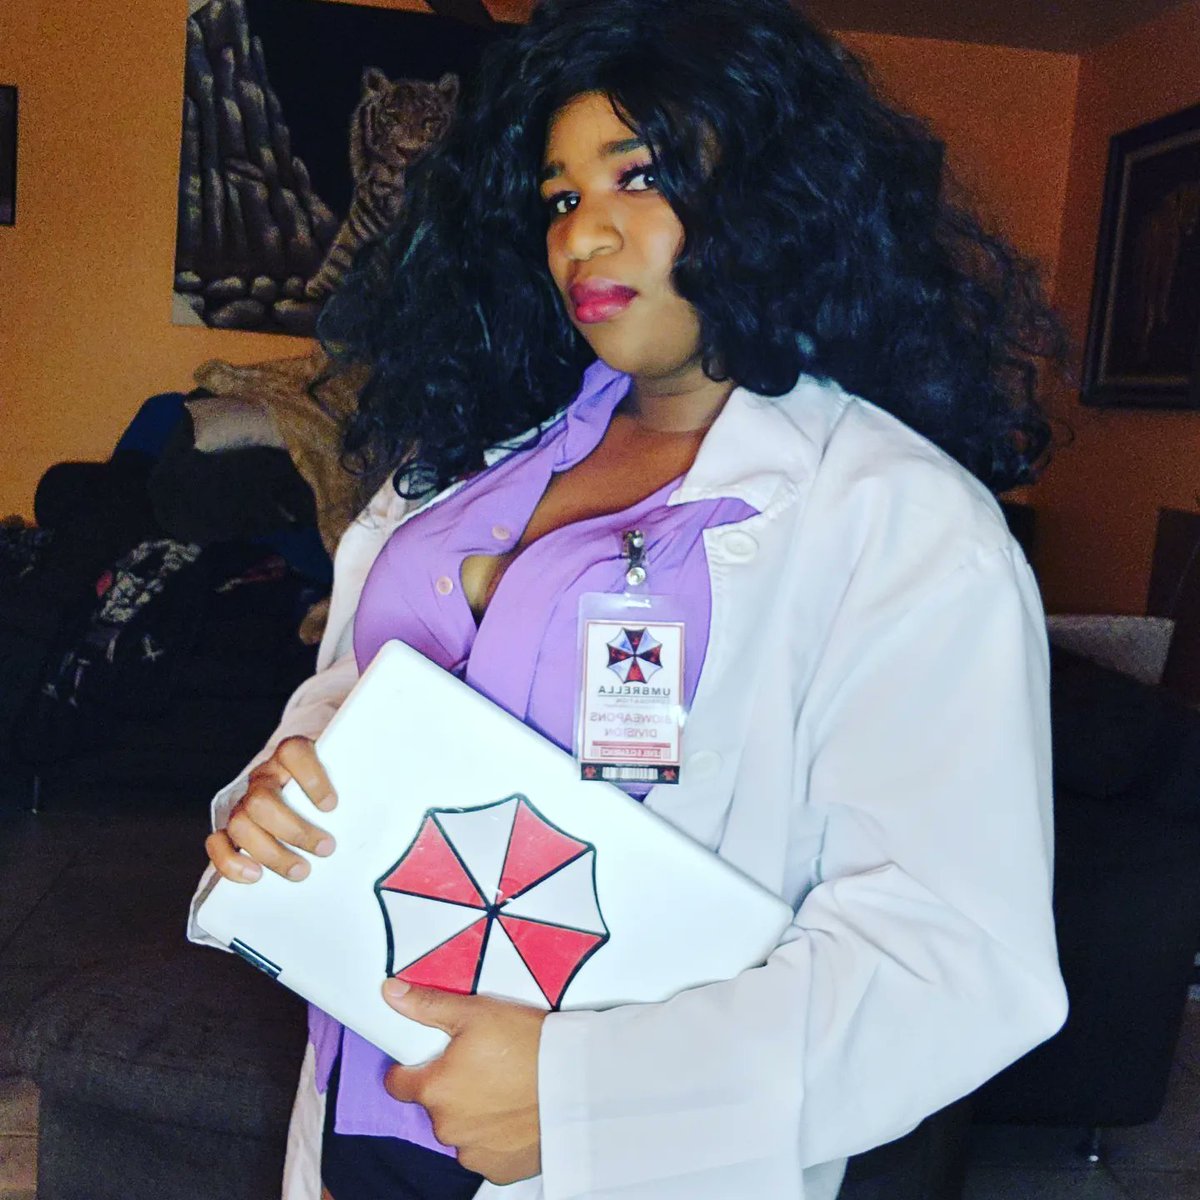 Good timezone loves Queen here with another resident evil cosplay for you. #cosplay #umbrella #residentevil #residentevilcosplay #umbrellacorporation #originalcharacter